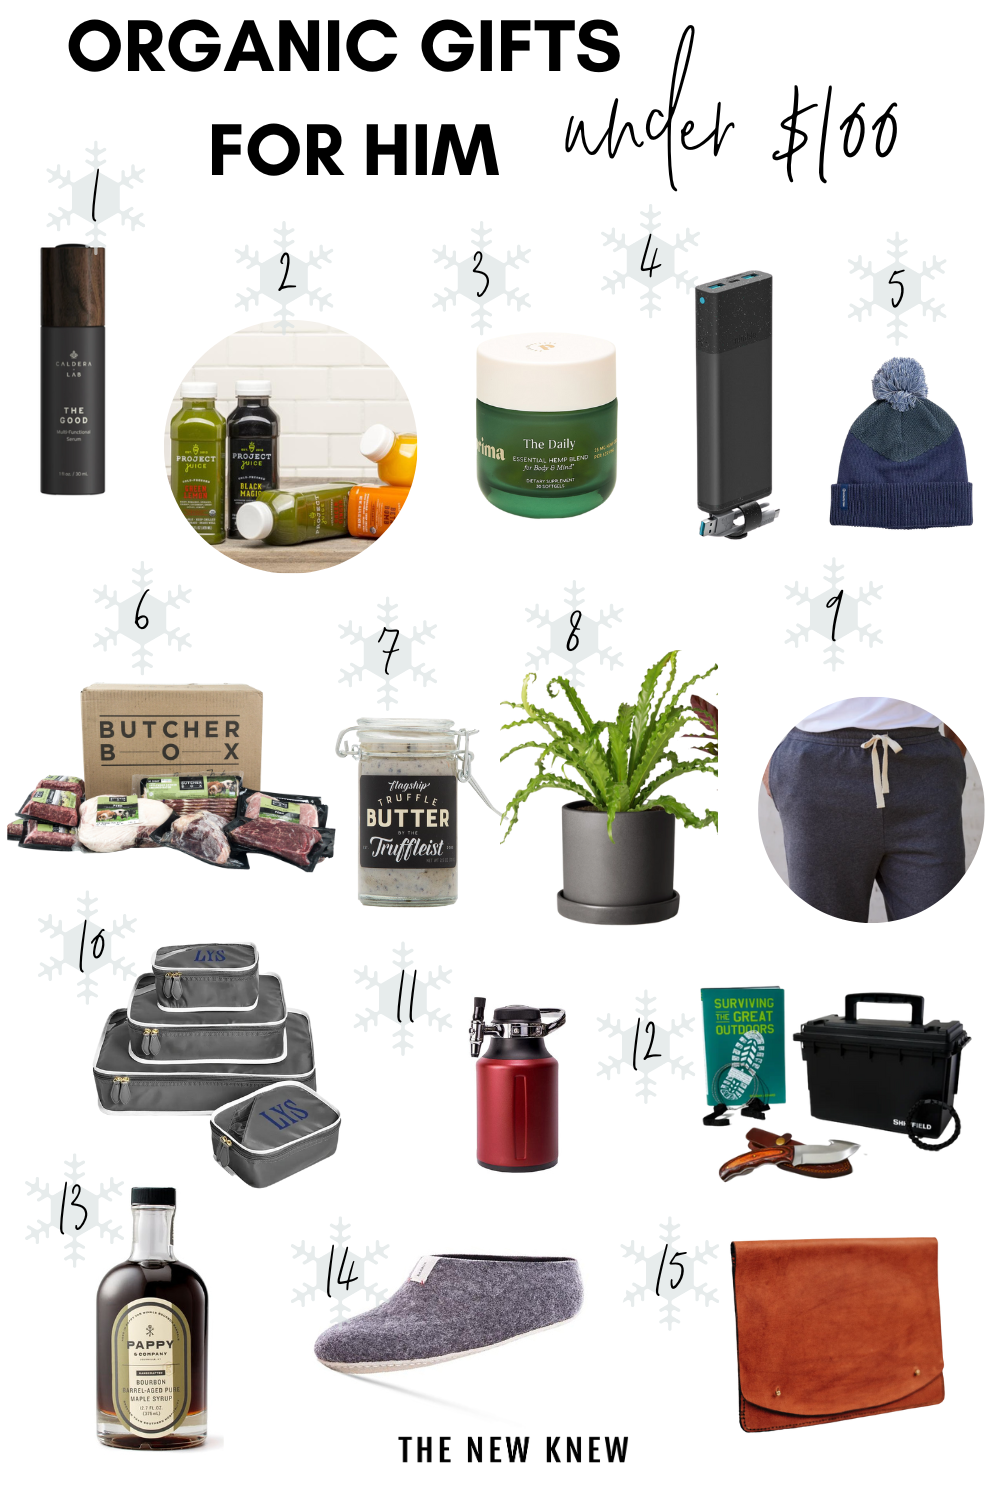 organic gifts for him under $100